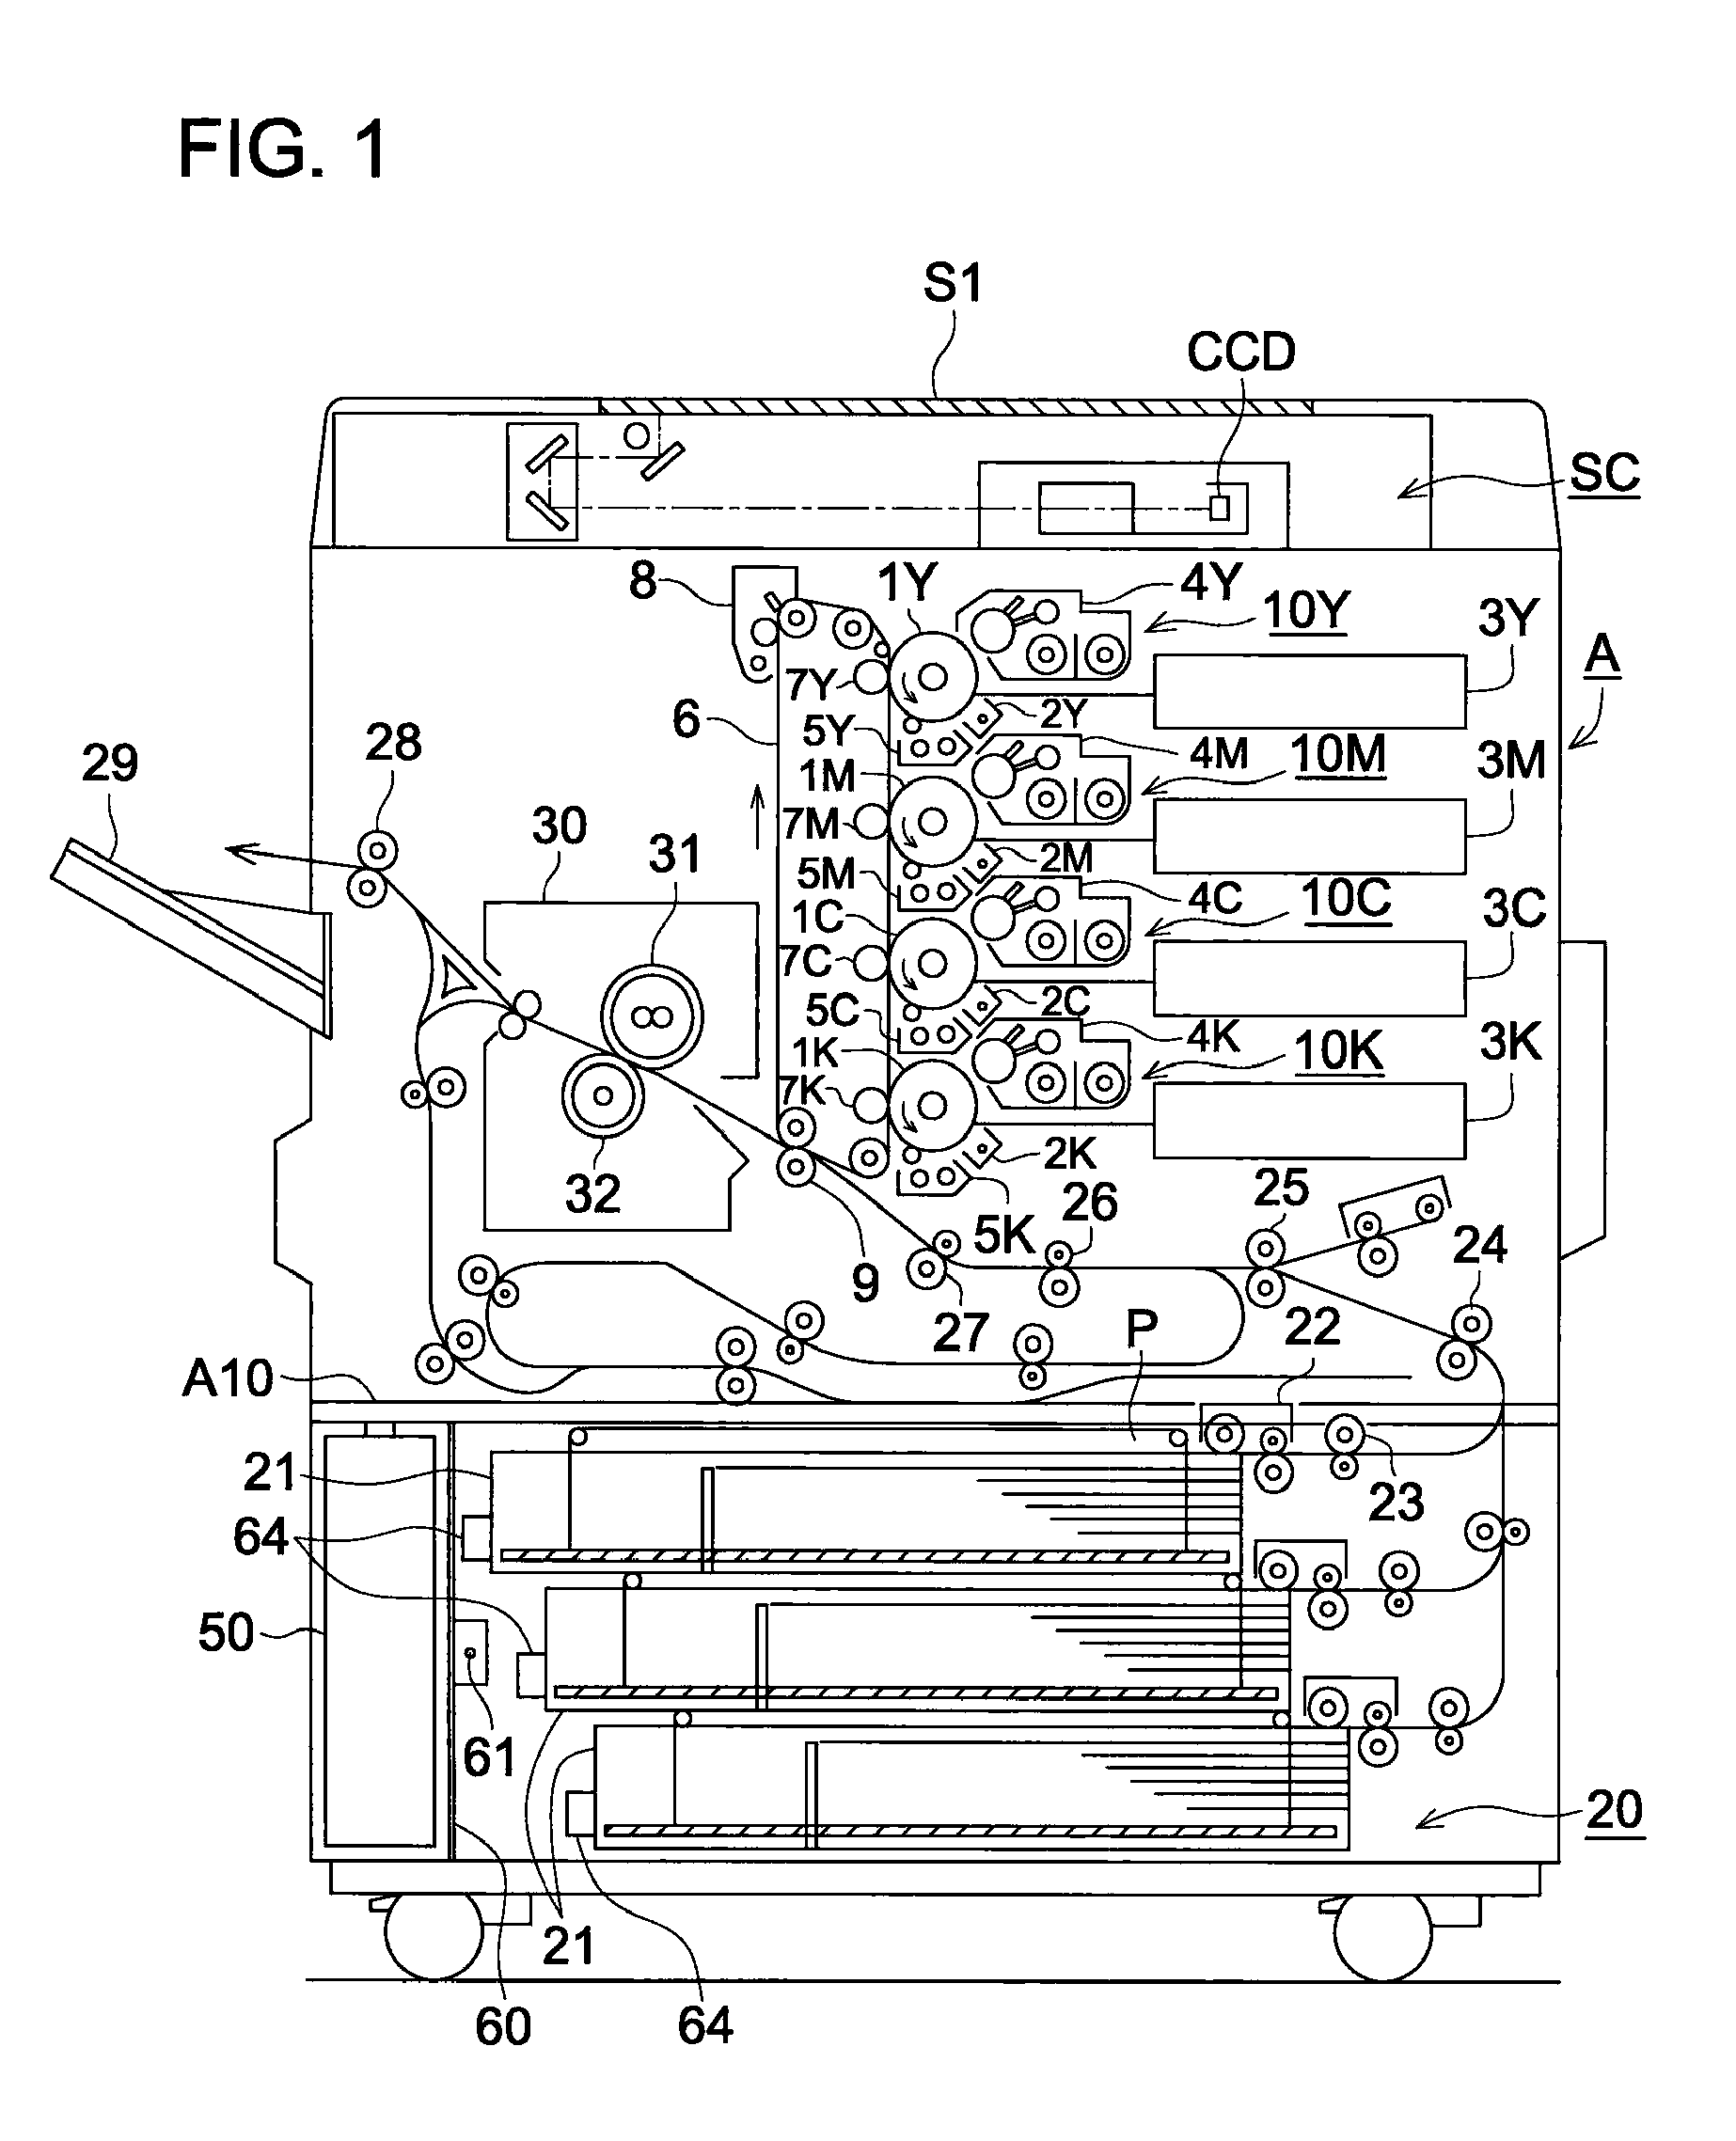 Image forming apparatus with dehumidifying heater